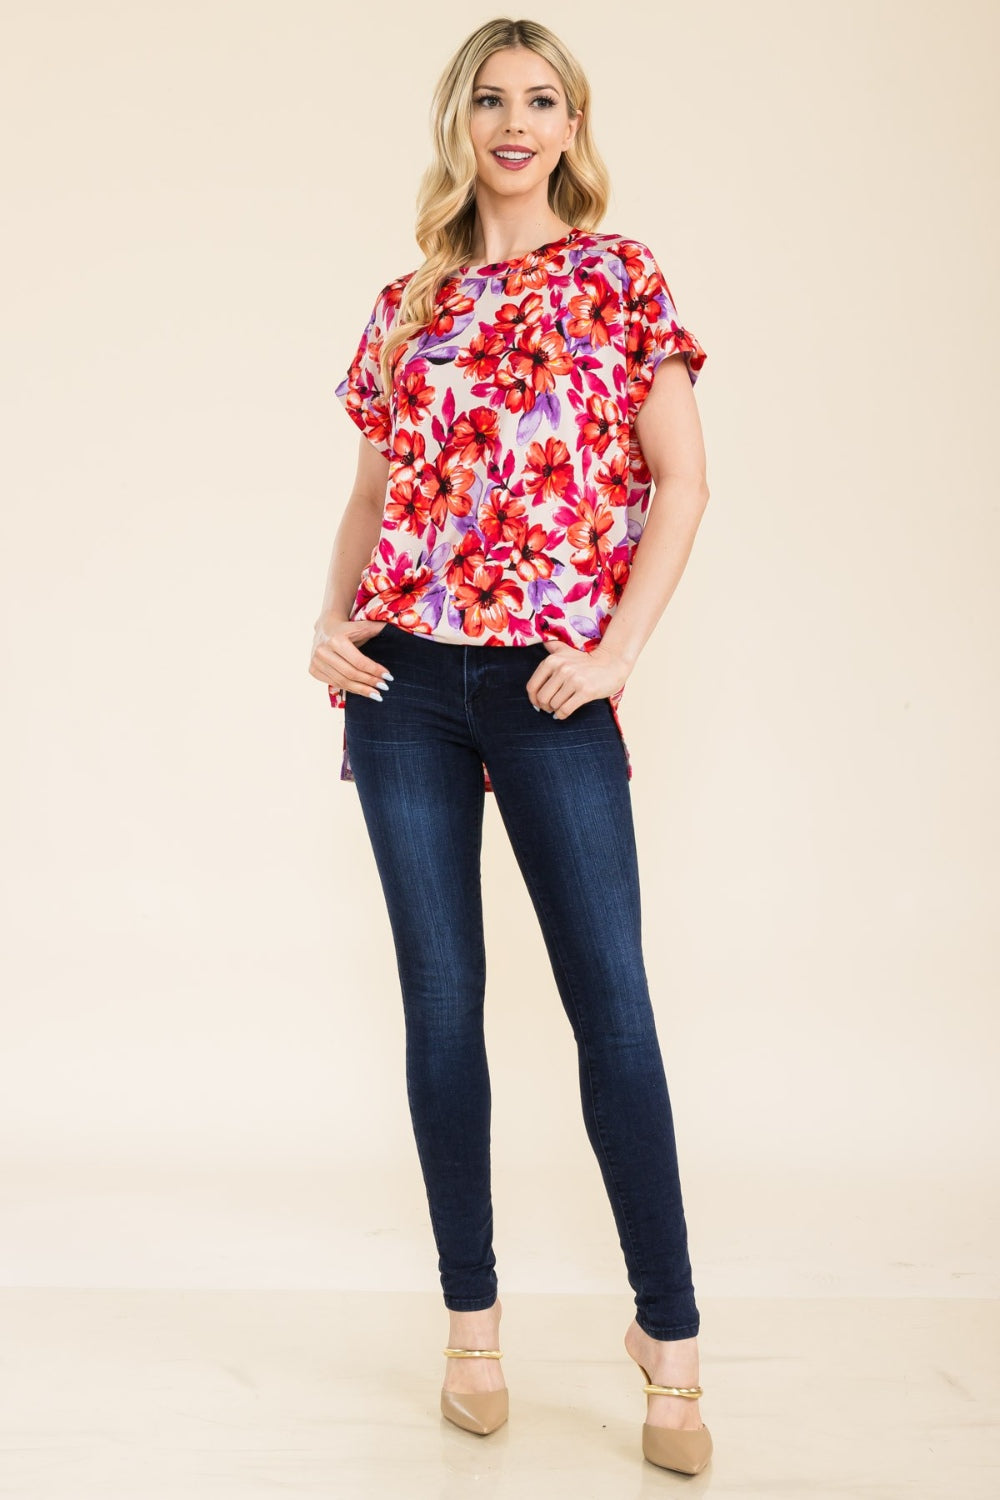 Libby Round Neck Short Sleeve Floral Top